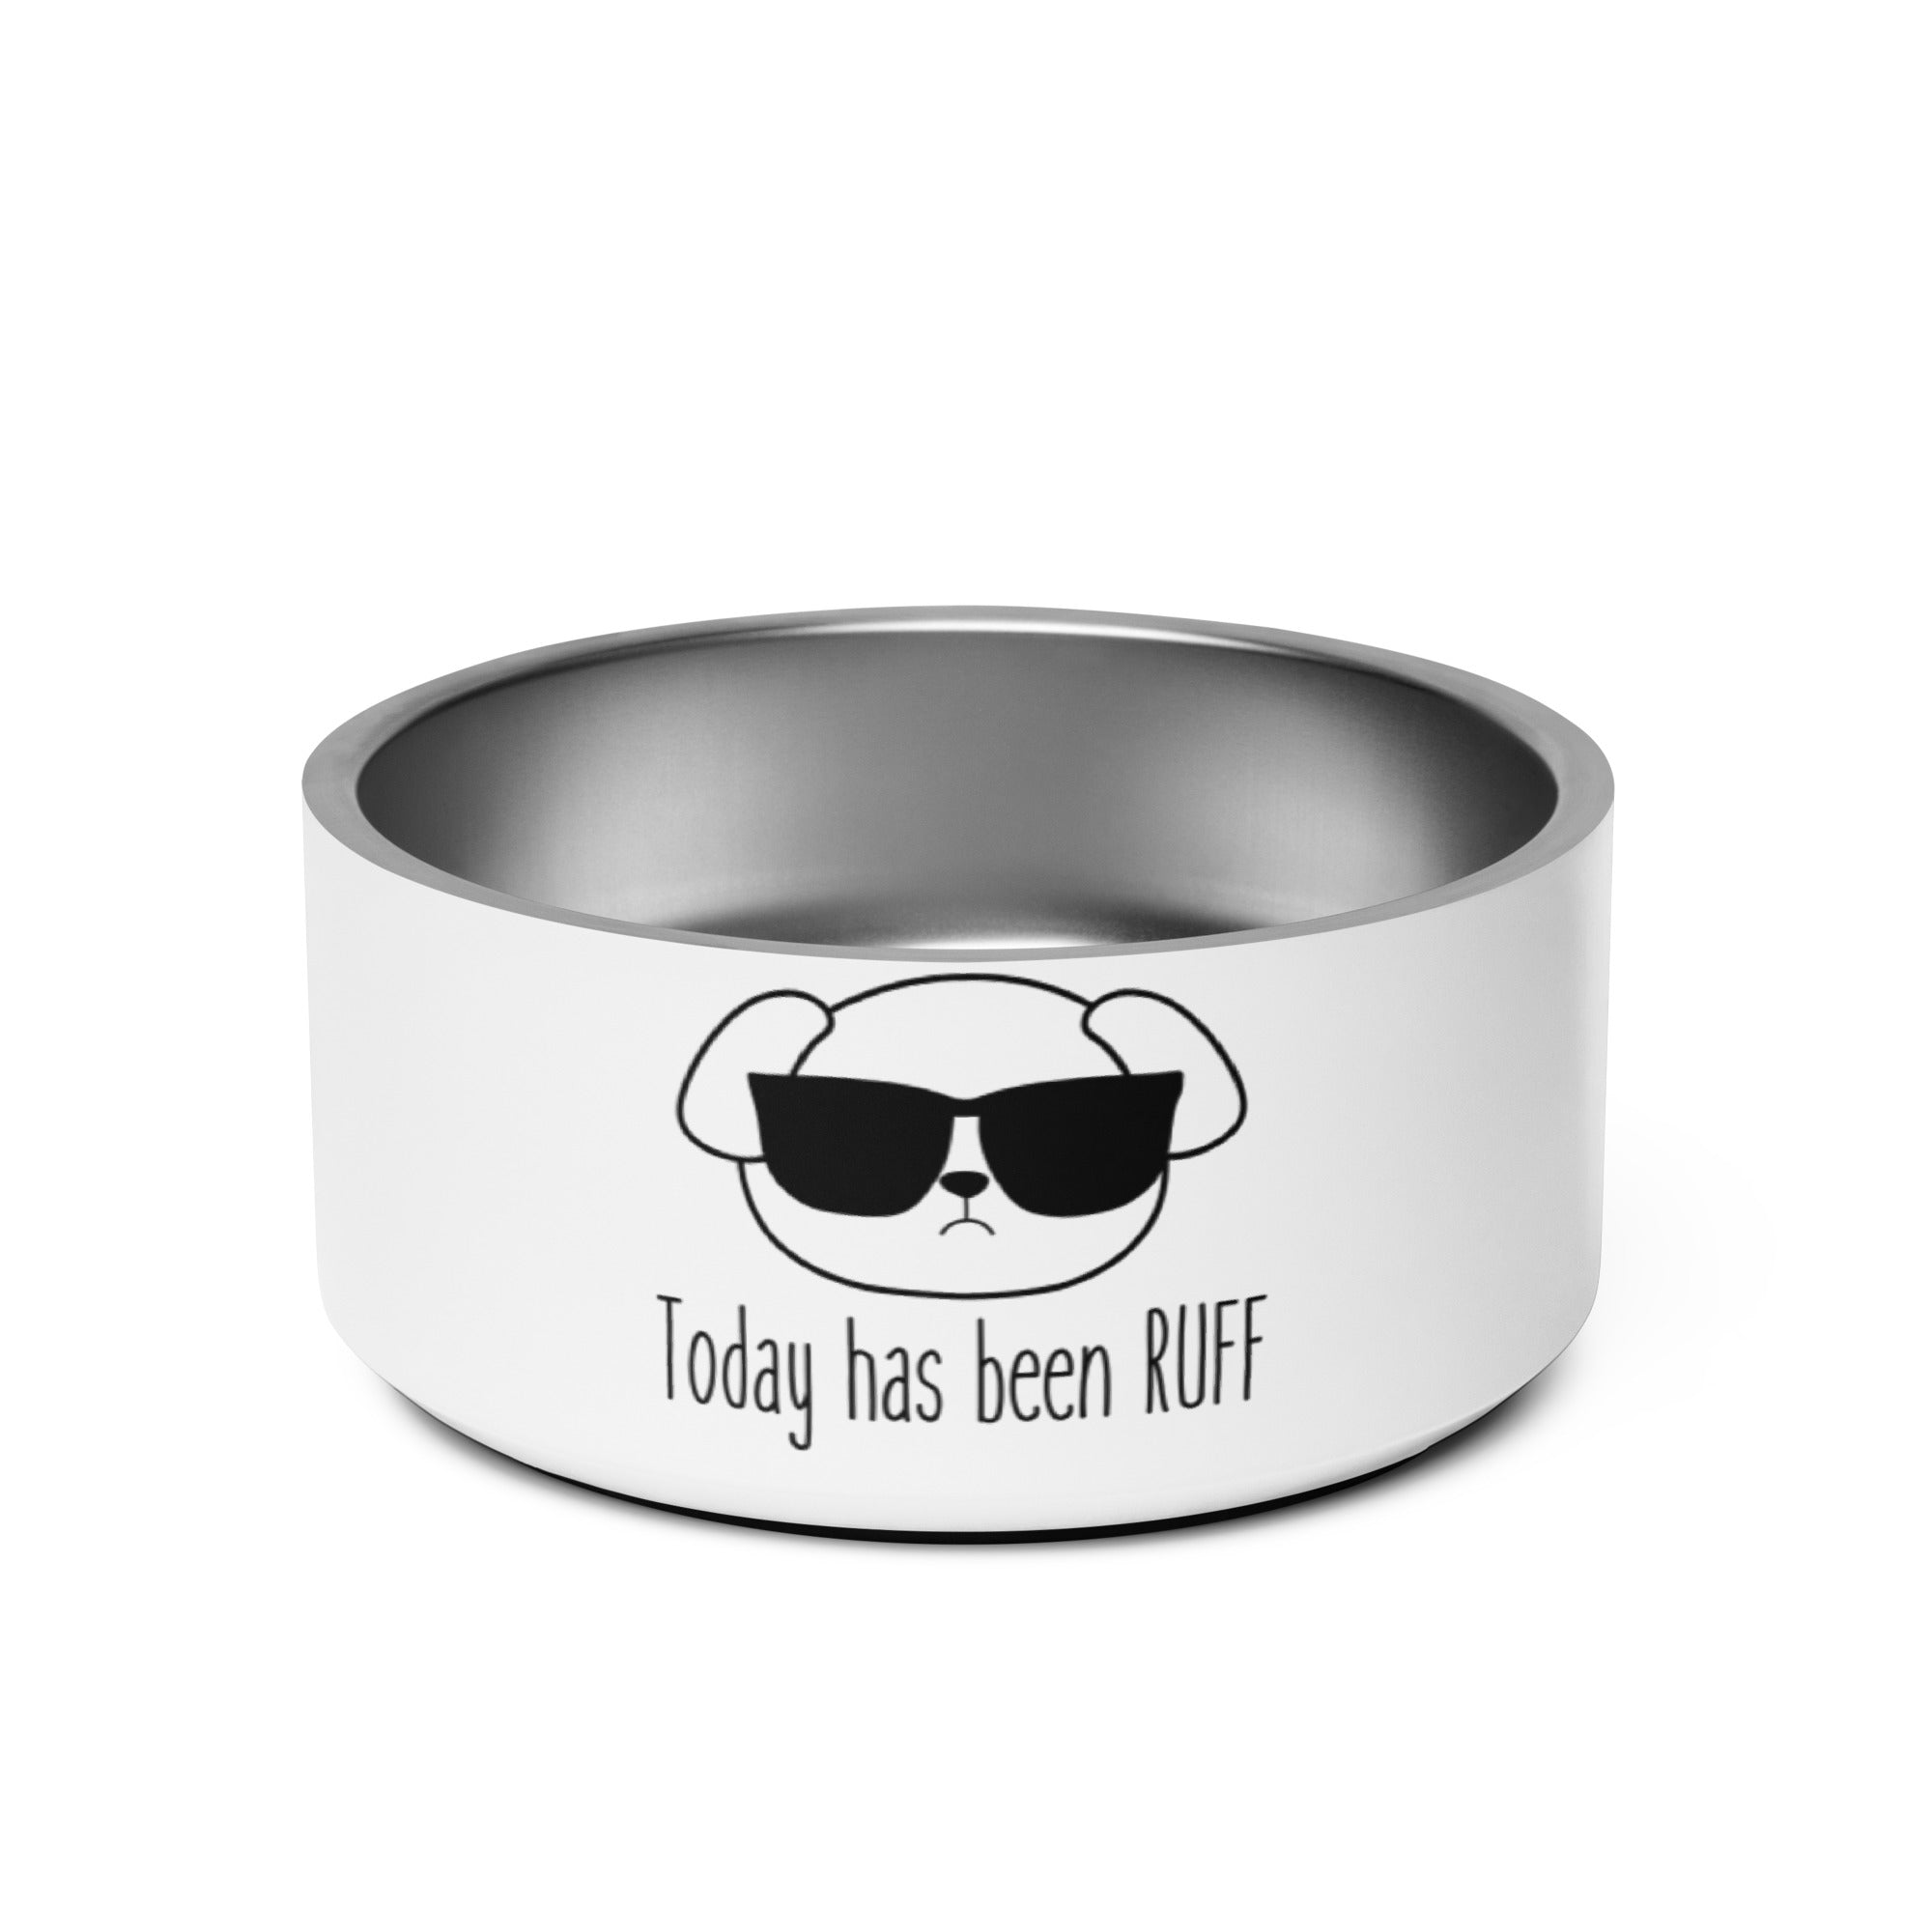 Pet bowl- Today has been Ruff